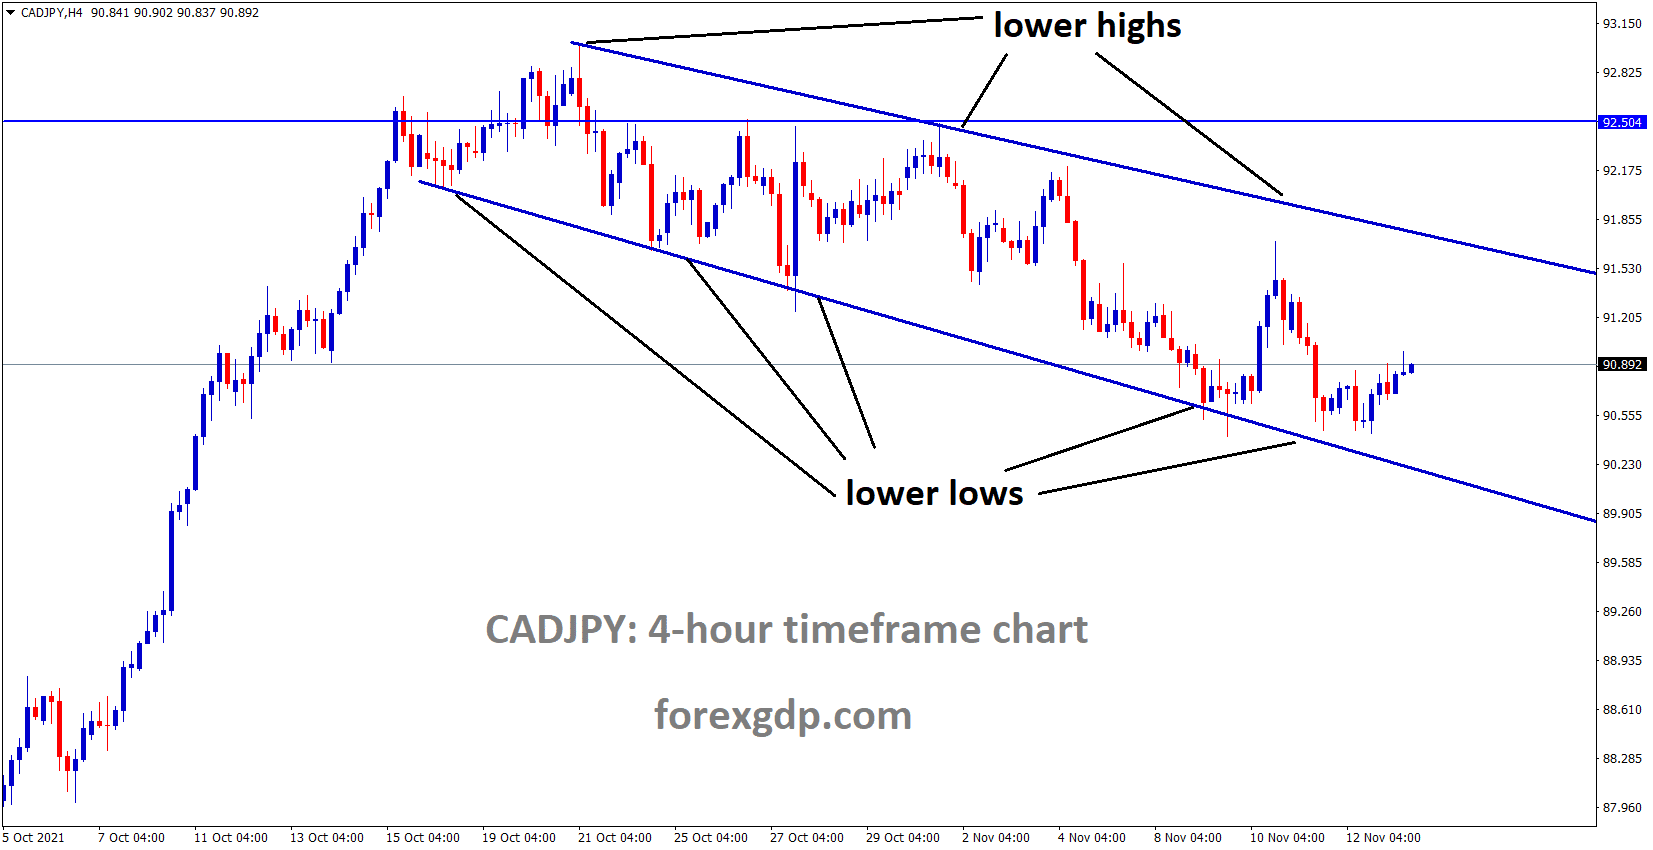 CADJPY is moving in the Descending channel and rebounded from the lower low area.